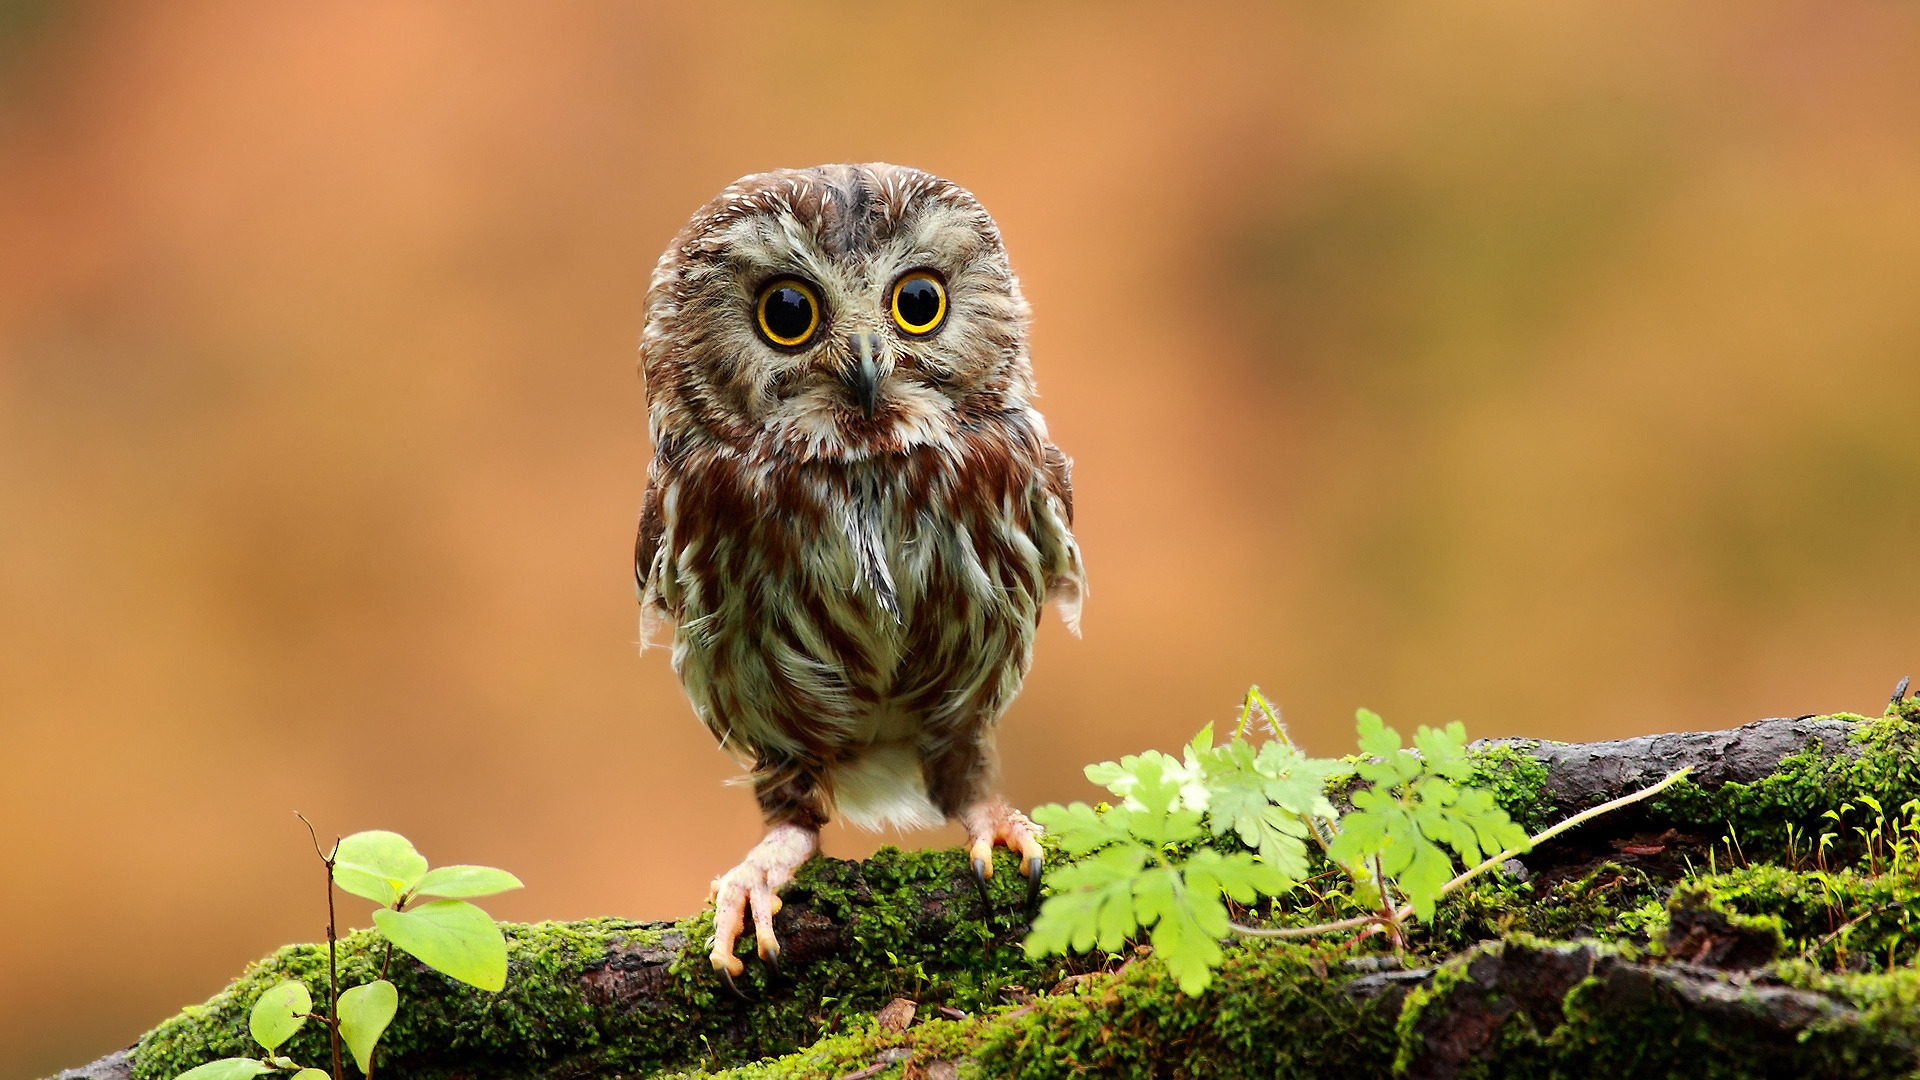 Cute Baby Owl for 1920 x 1080 HDTV 1080p resolution